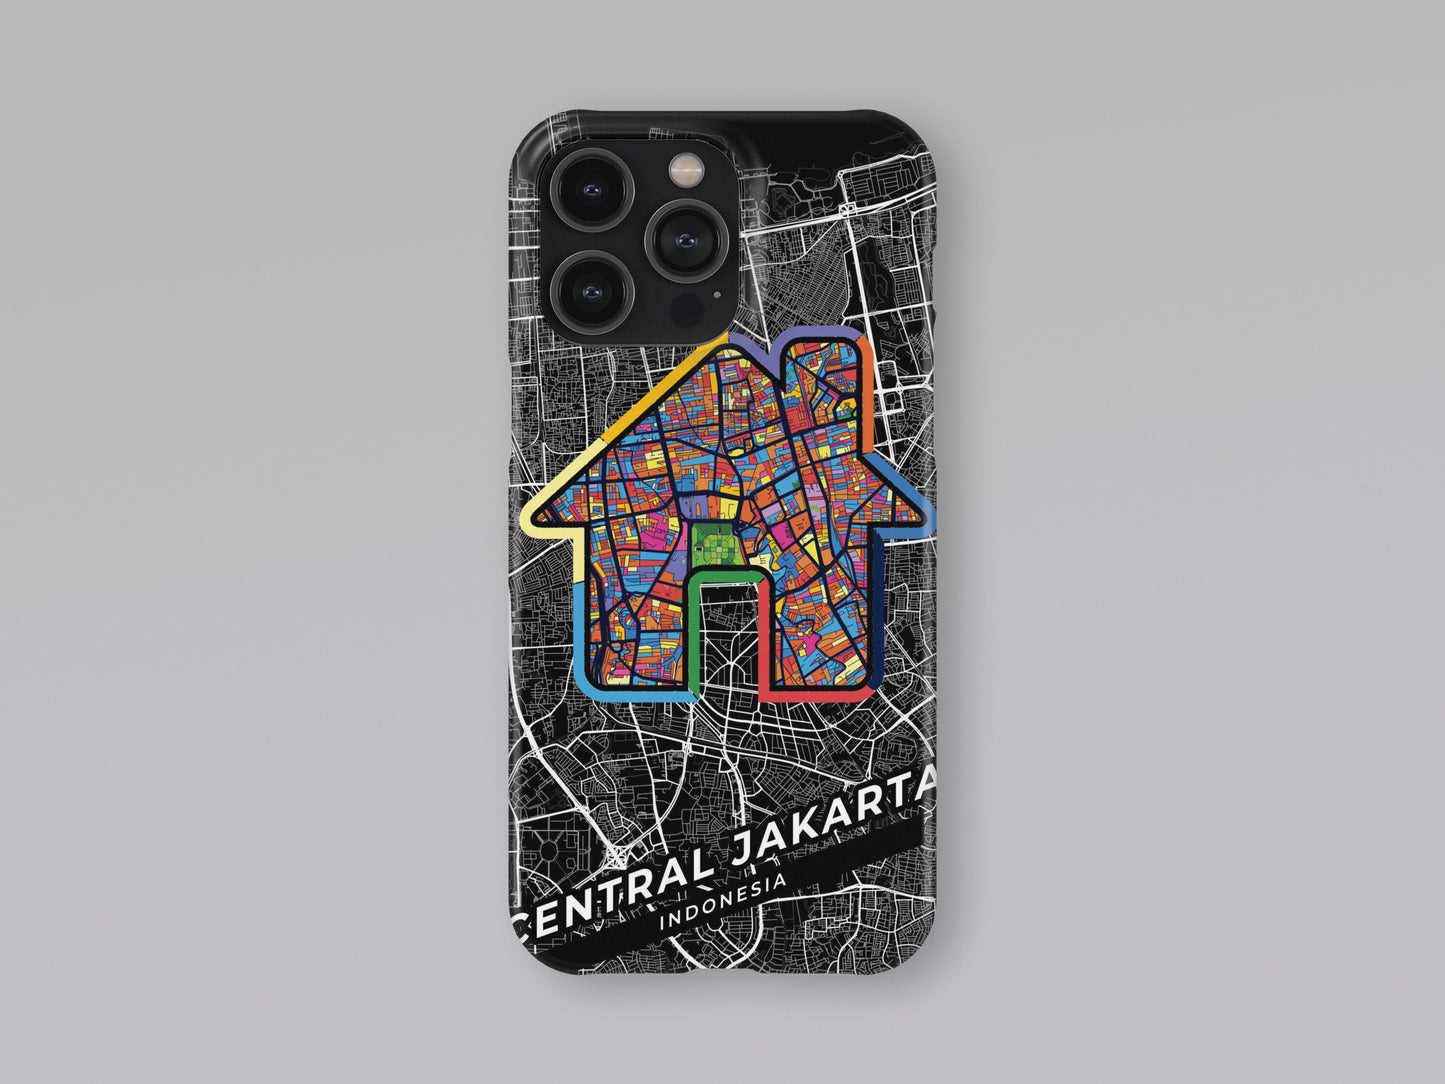 Central Jakarta Indonesia slim phone case with colorful icon. Birthday, wedding or housewarming gift. Couple match cases. 3